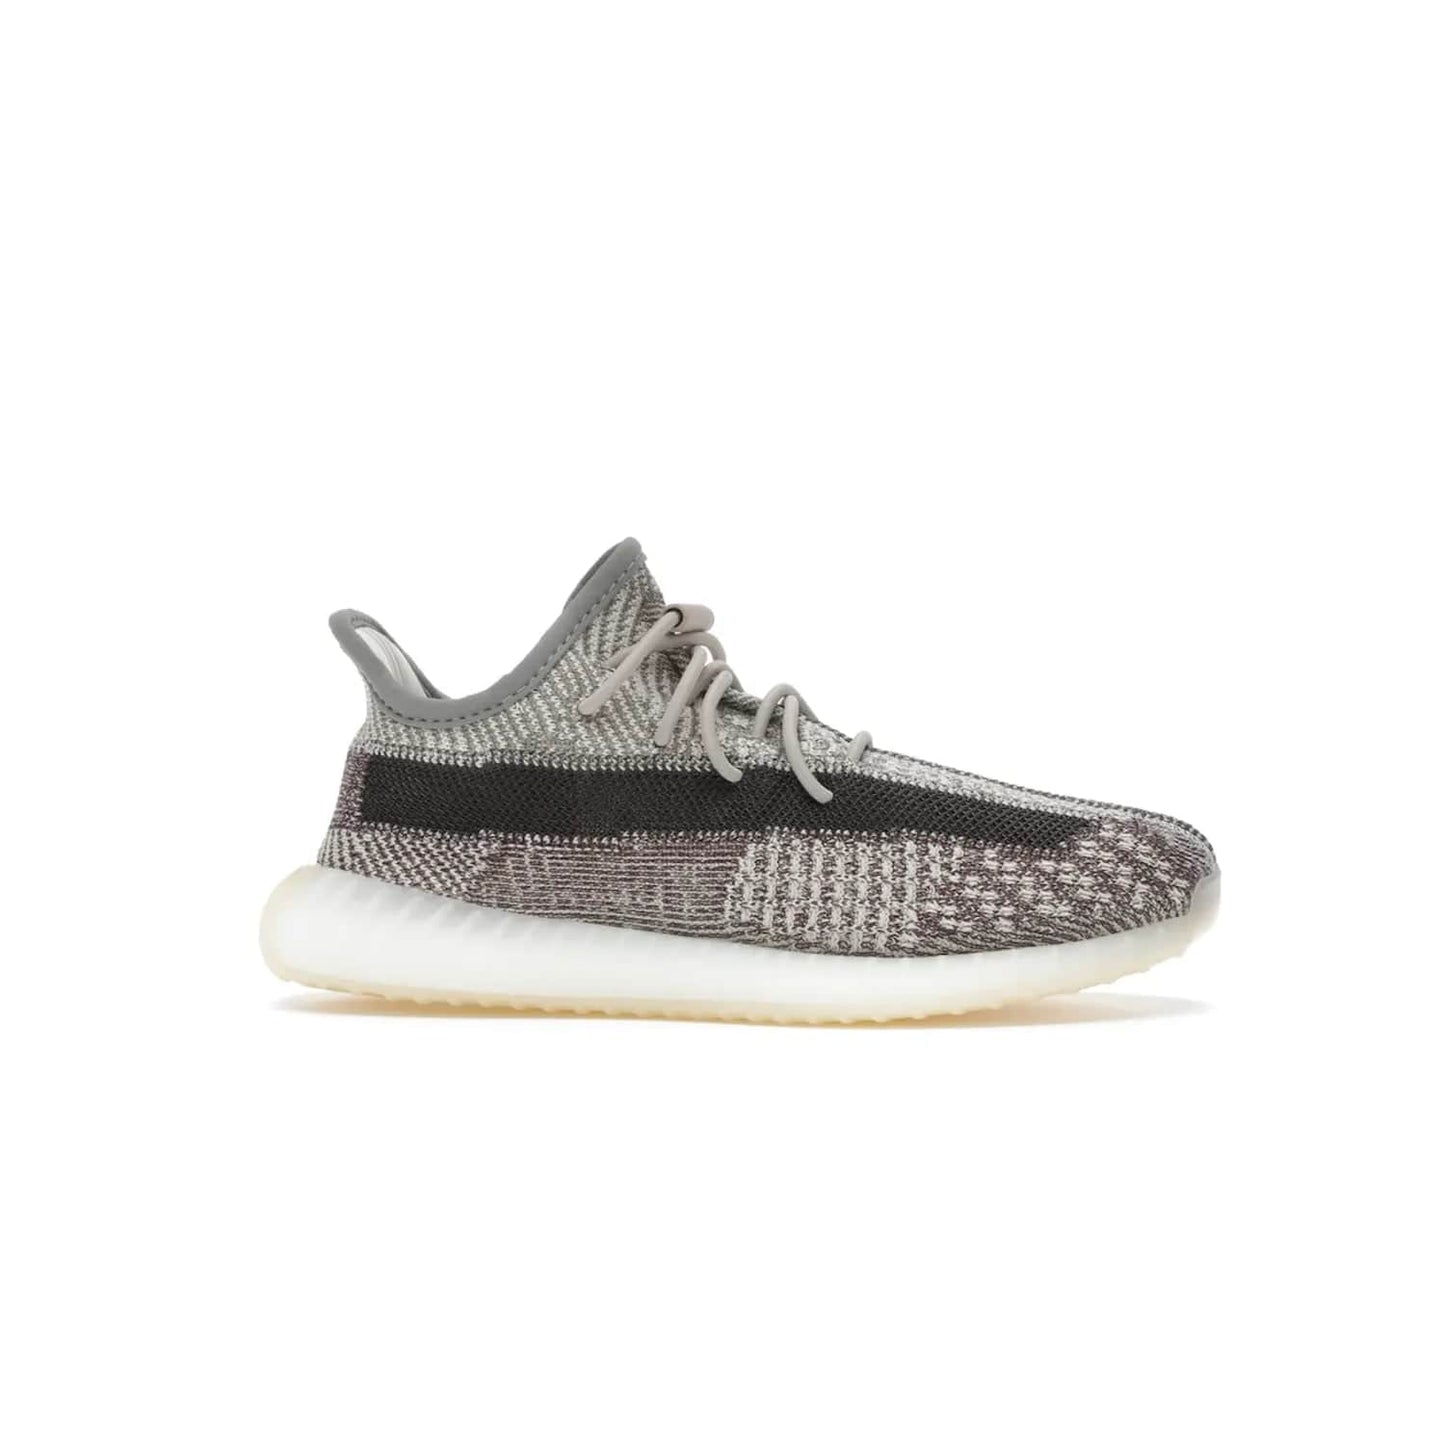 adidas Yeezy Boost 350 V2 Zyon (Kids) - Image 2 - Only at www.BallersClubKickz.com - The adidas Yeezy Boost 350 V2 Zyon (Kids) - perfect pick for fashion-savvy kids. Features soft Primeknit upper, lace closure & colorful patterning. Comfort & style for kids' summer outfits!